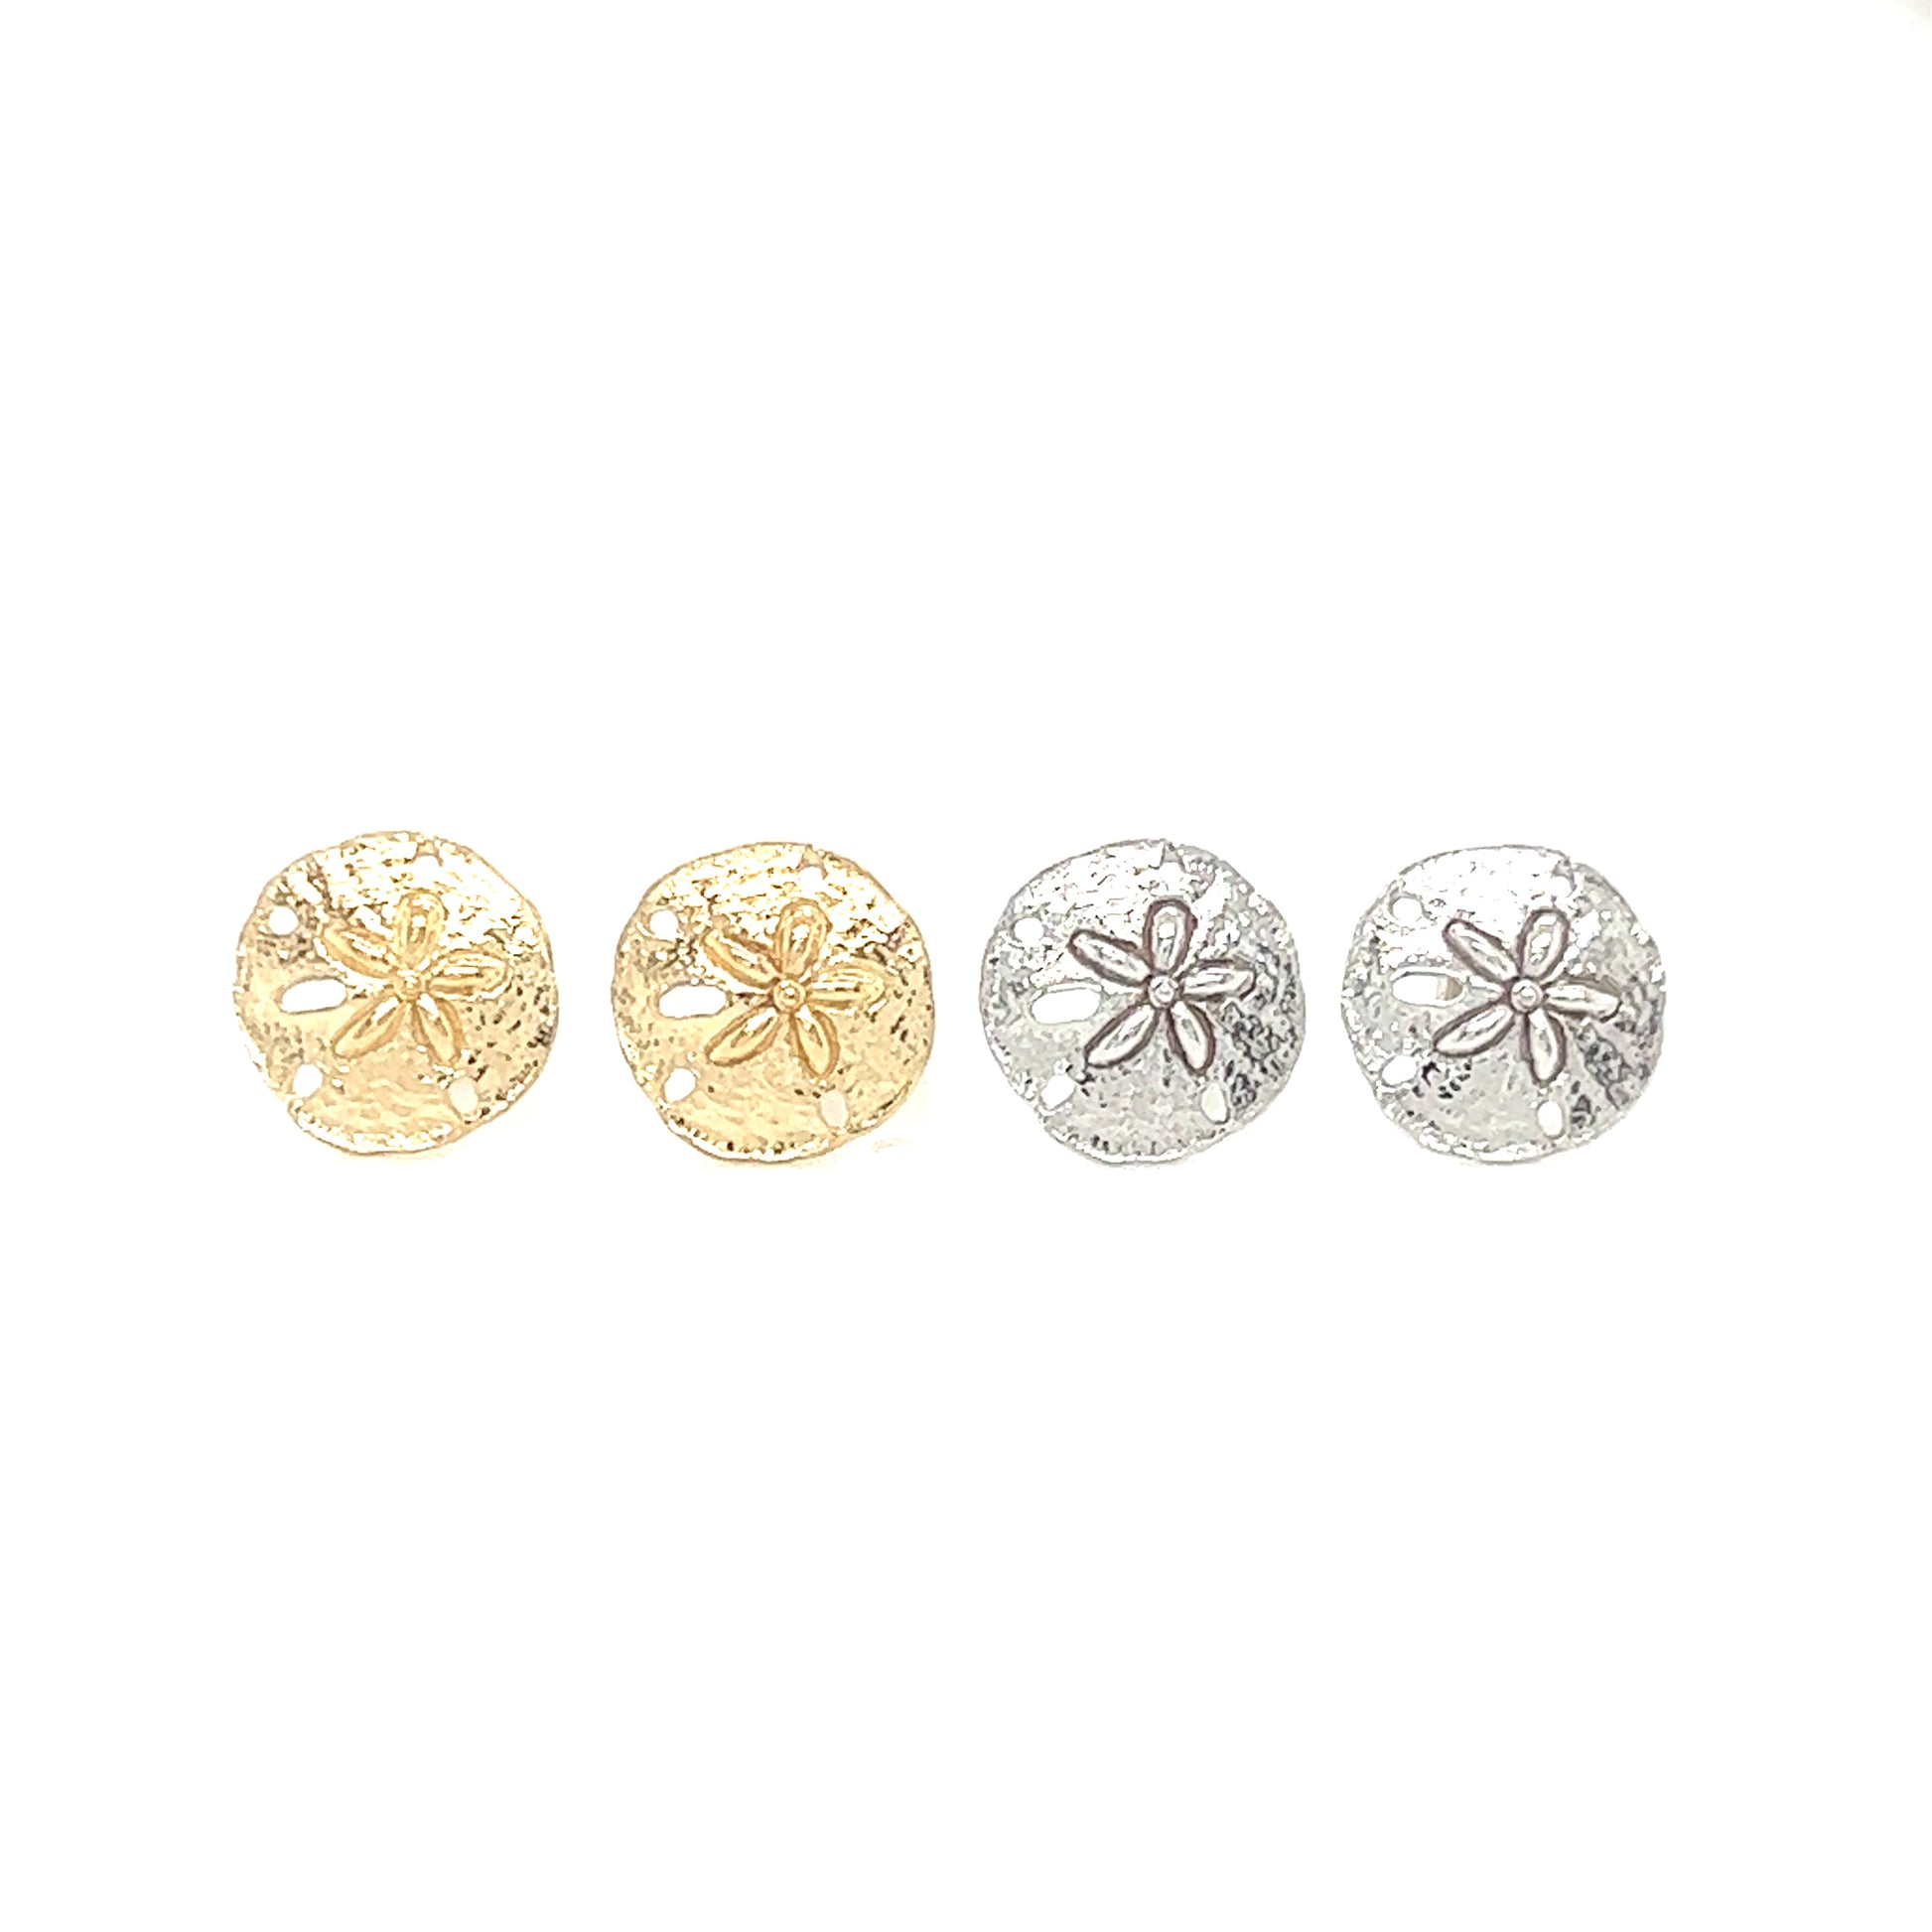 Sand Dollar Stud Earrings in 14K Gold Front View